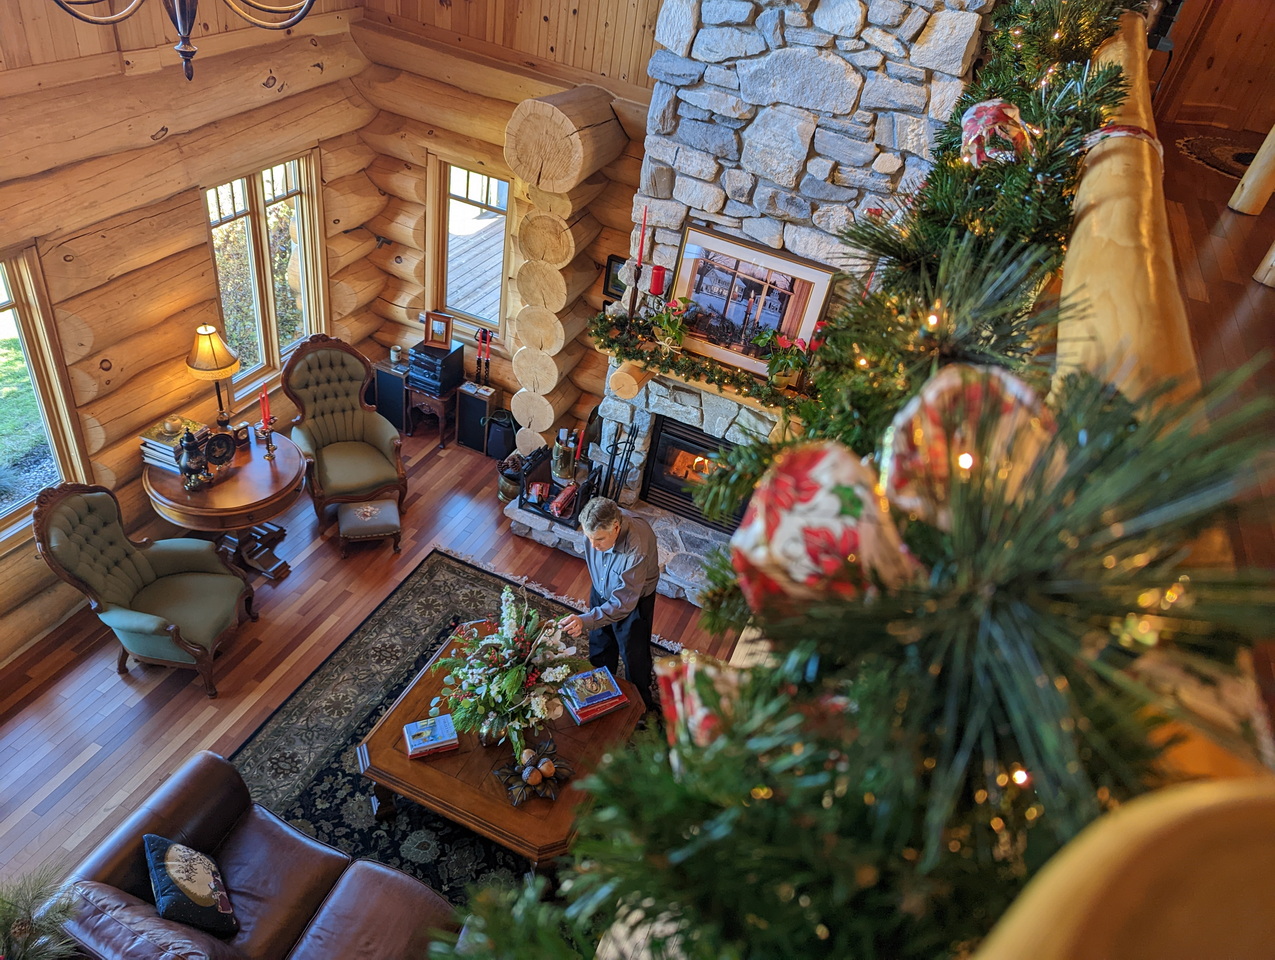 Homes for the Holidays 2022 cathedral ceiling log cabin